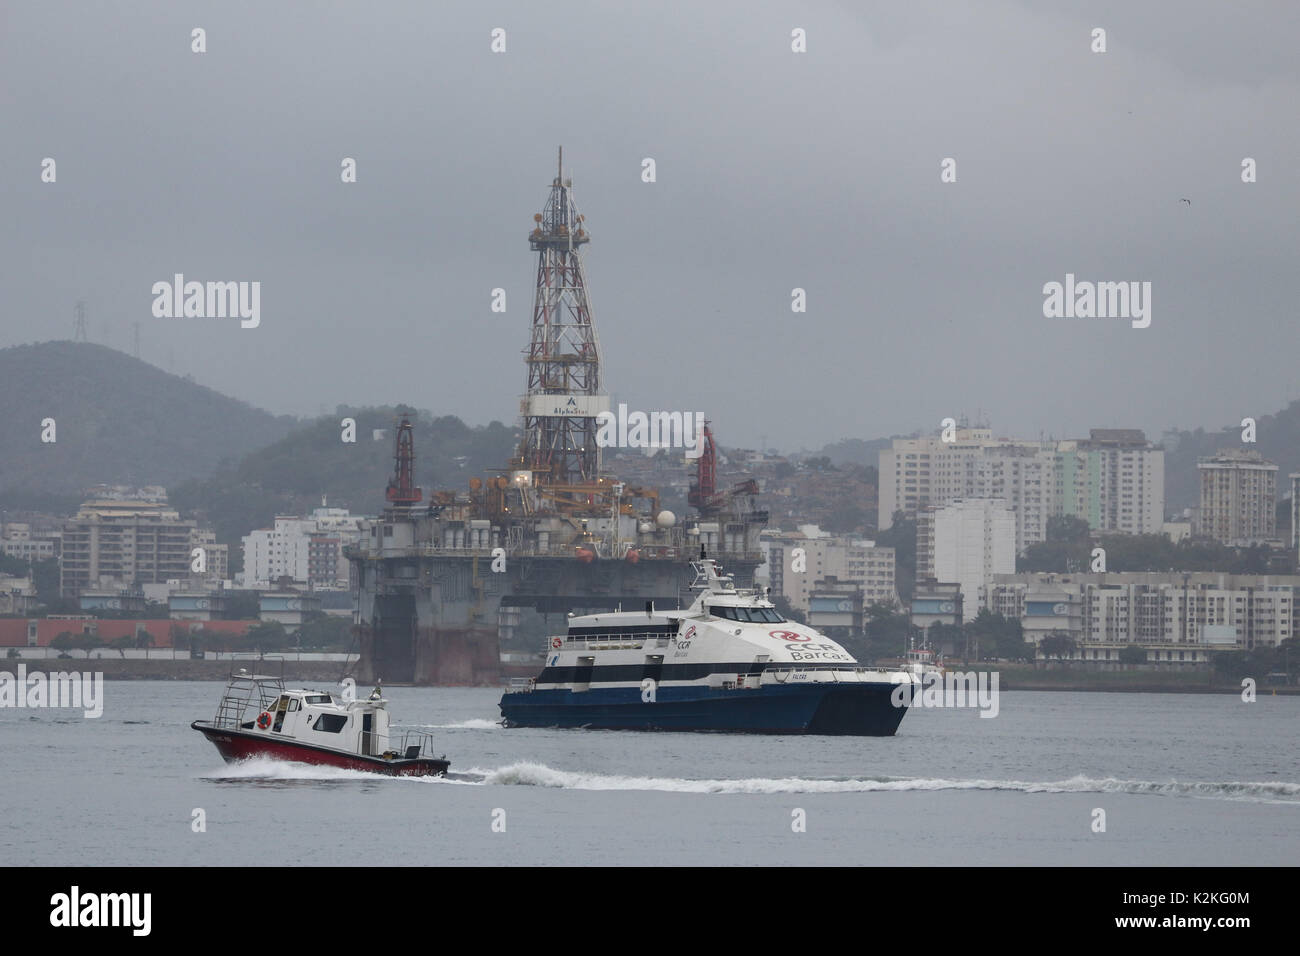 Rio de Janeiro, Brazil, August 31, 2017: End of August is marked by falling temperatures in the city of Rio de Janeiro. The thermometers marked below 20 degrees celsius. In this image boats travel near the oil platform in the Guanabara Bay, in the Center of Rio. Credit: Luiz Souza/Alamy Live News Stock Photo